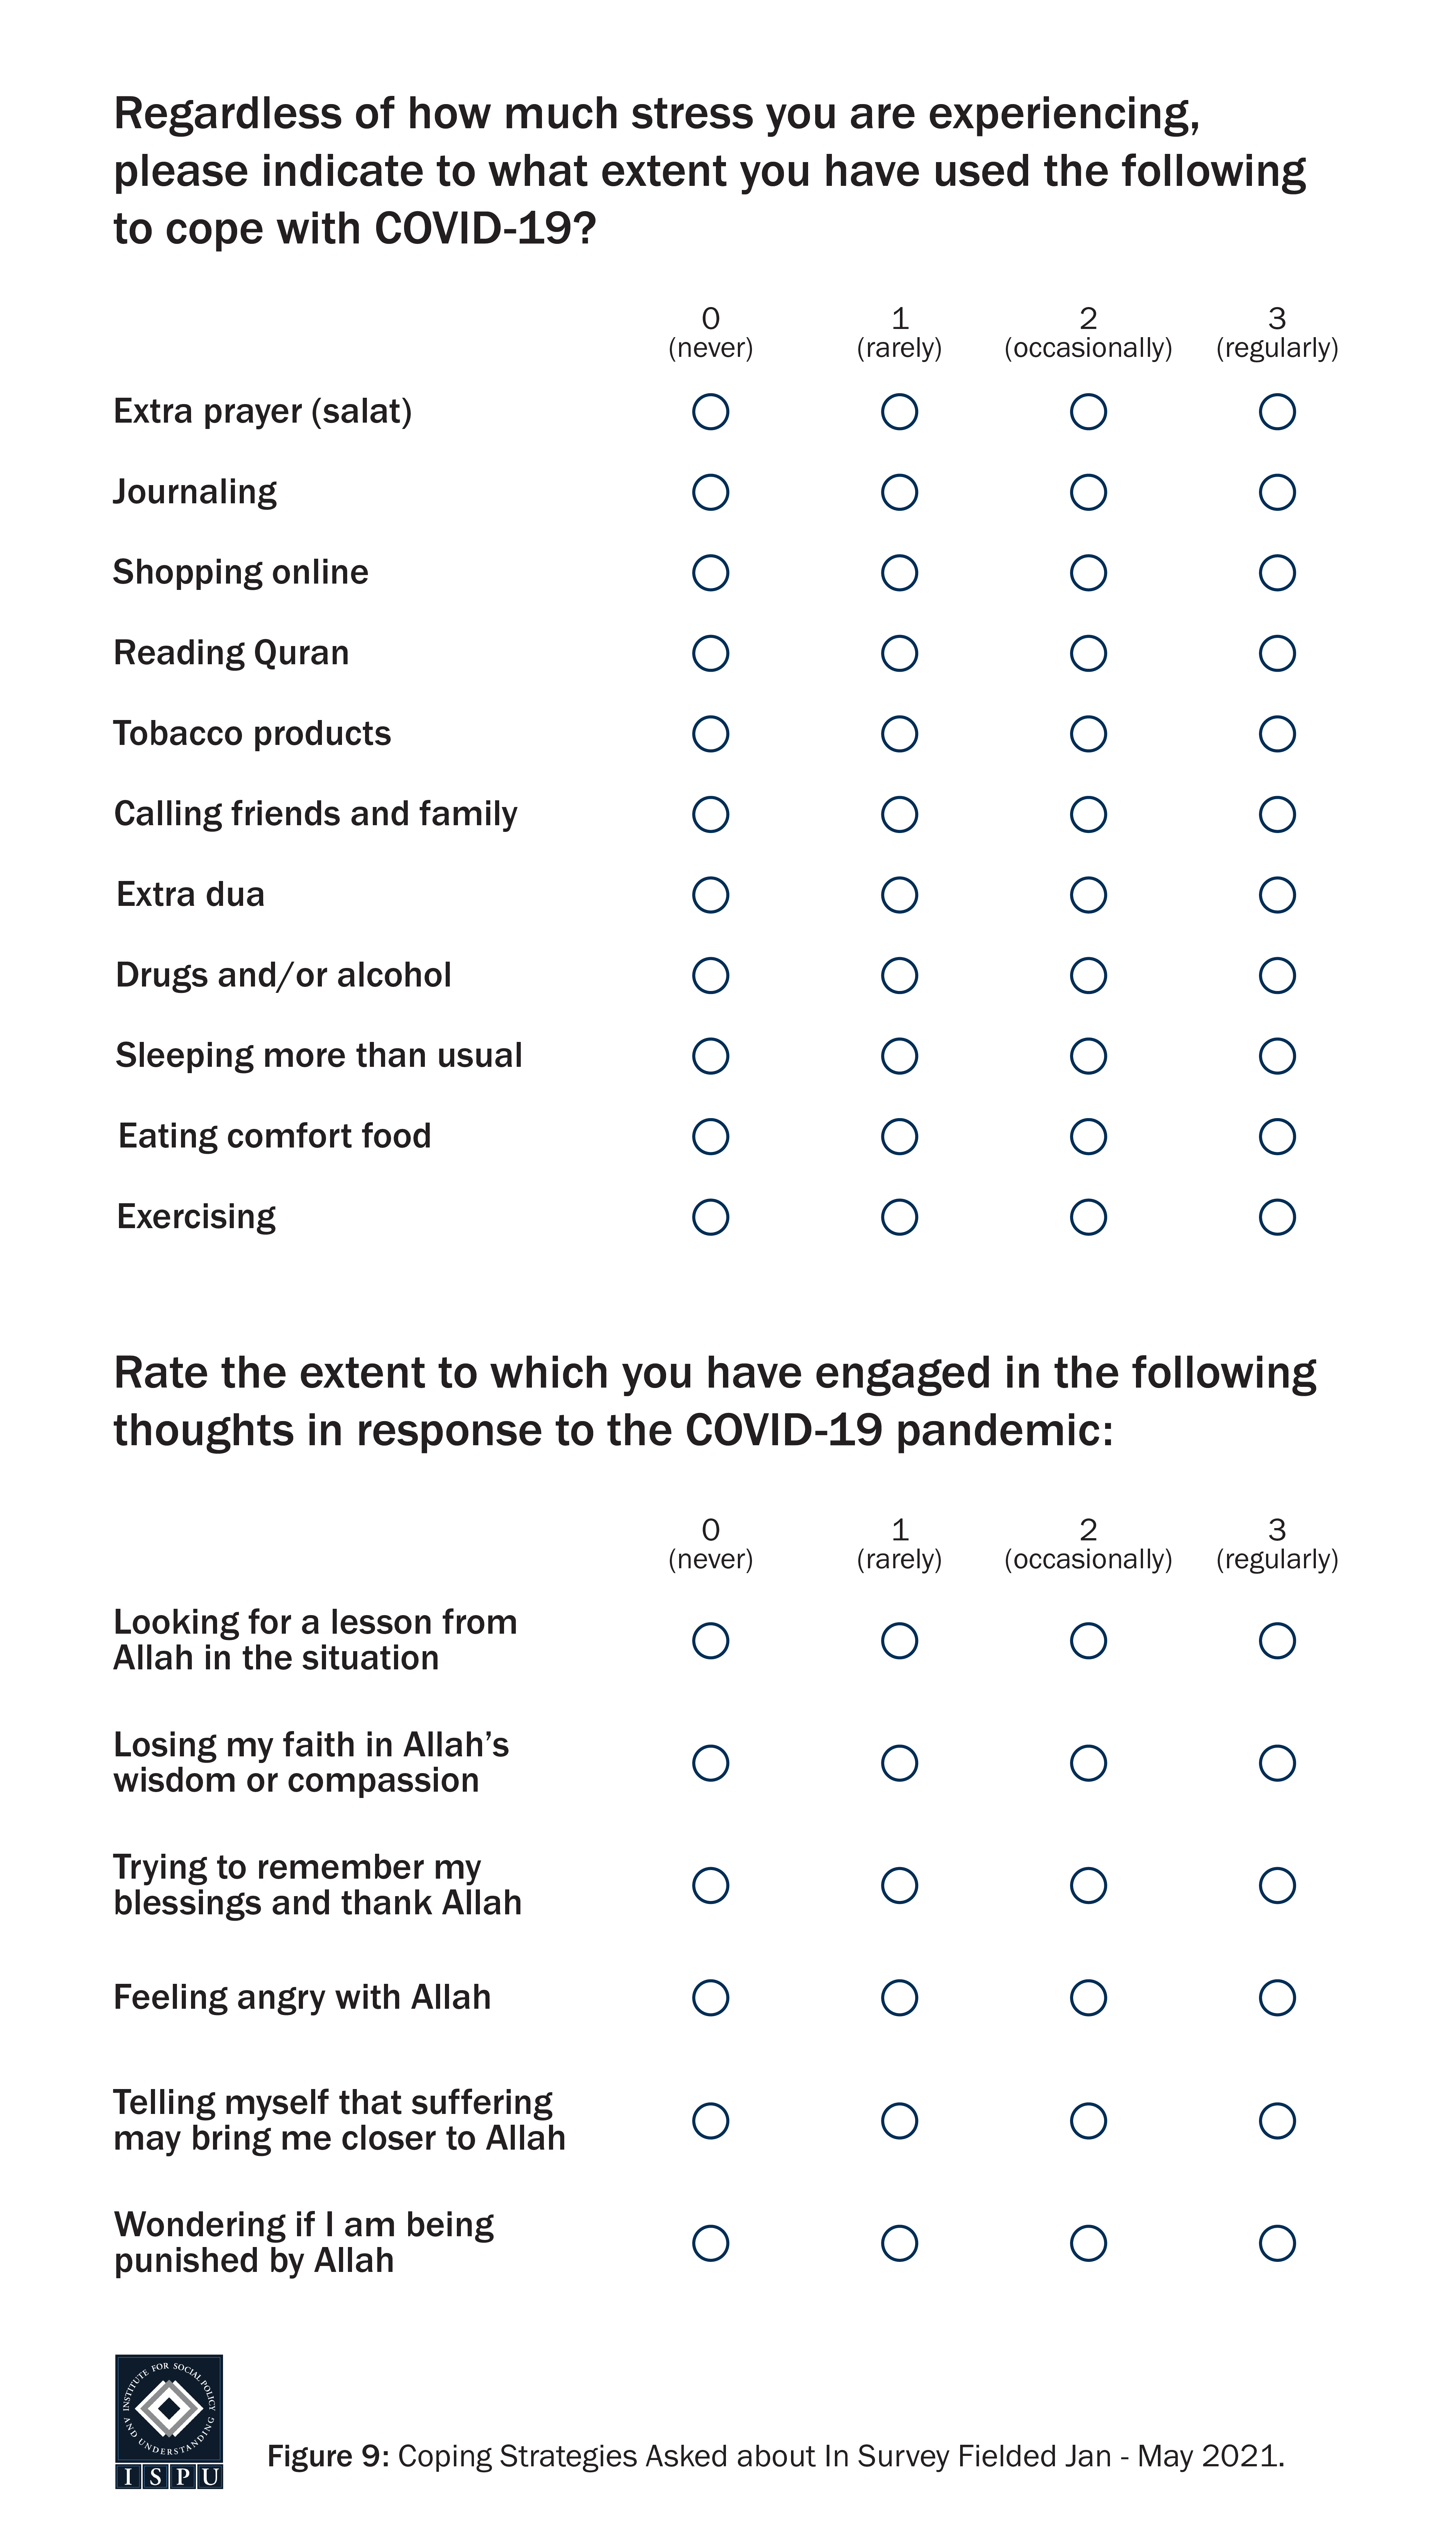 Table displaying: eleven coping skills with options to rank engagement as never, rarely, occasionally, and frequently. Then, six thoughts related to Allah with options to rank engagement as never, rarely, occasionally, and frequently